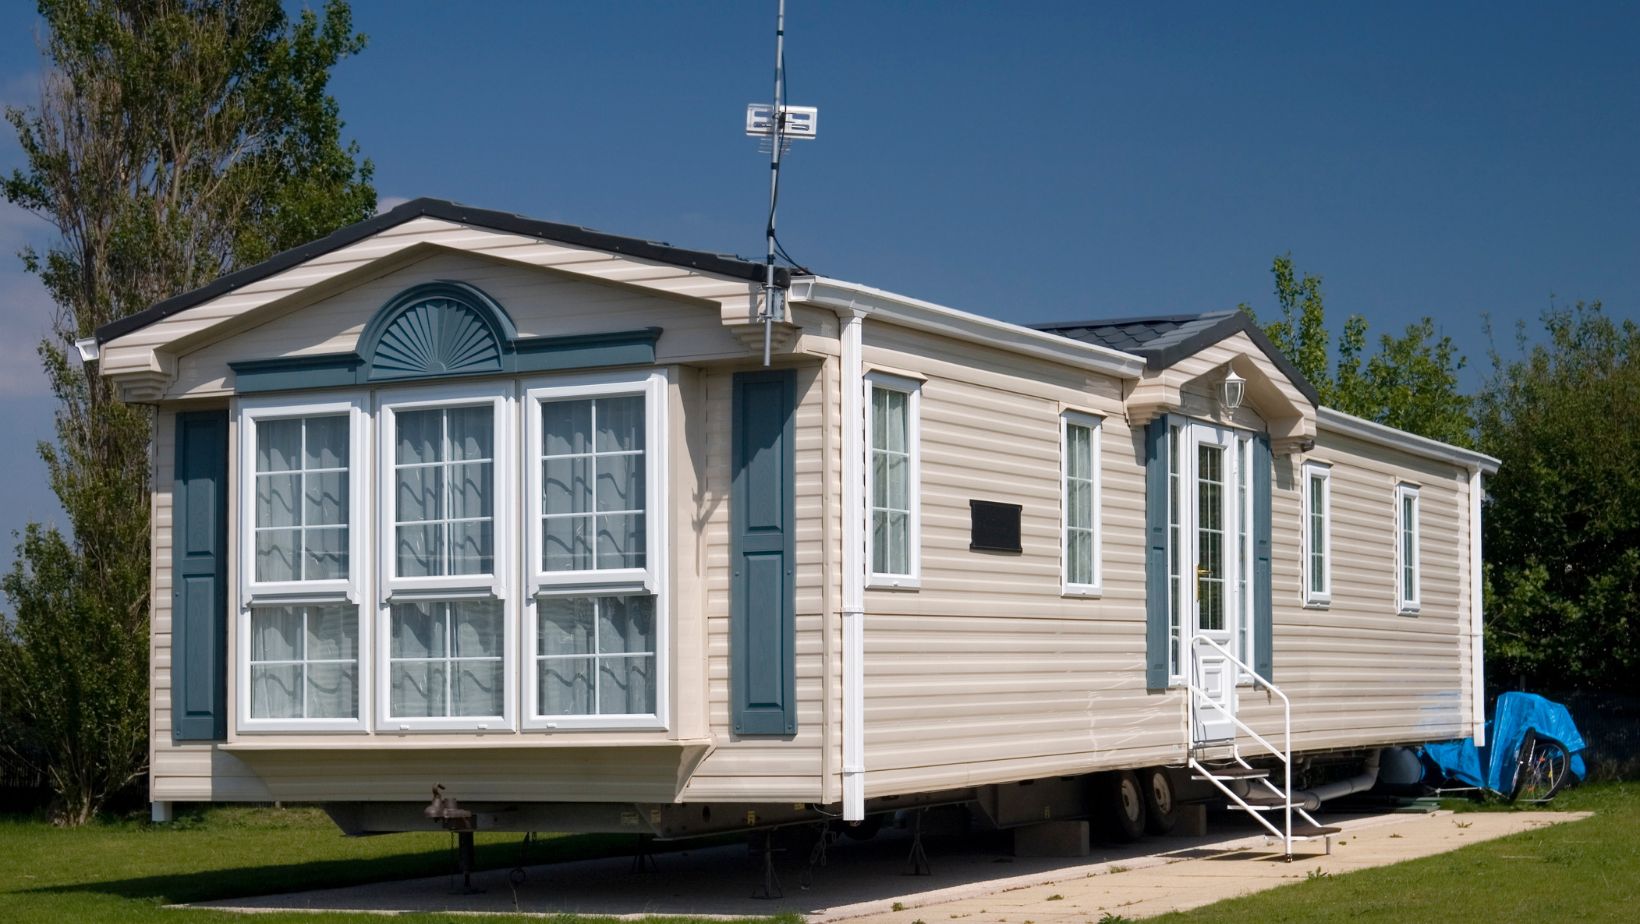 how to find out if land is zoned for mobile home